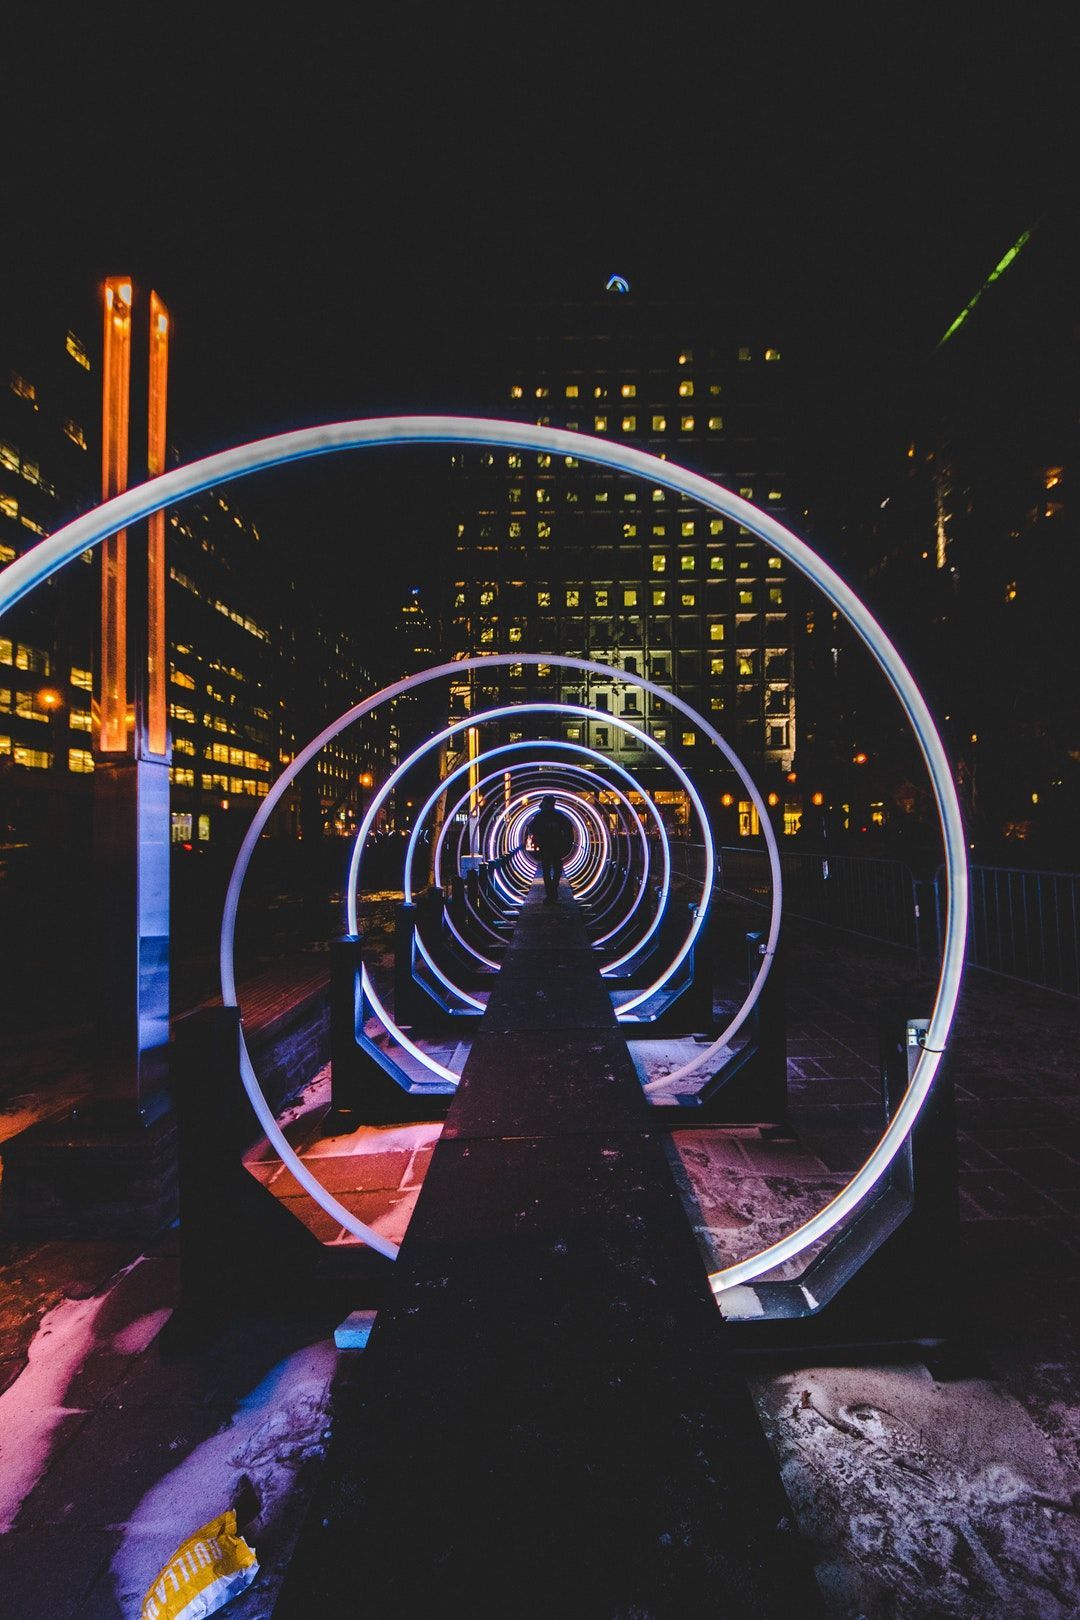 Download this free HD photo of city, urban, spiral and lights in Montreal, Canada by Cédric Servay. Wallpaper iphone neon, Neon wallpaper, Huawei wallpaper